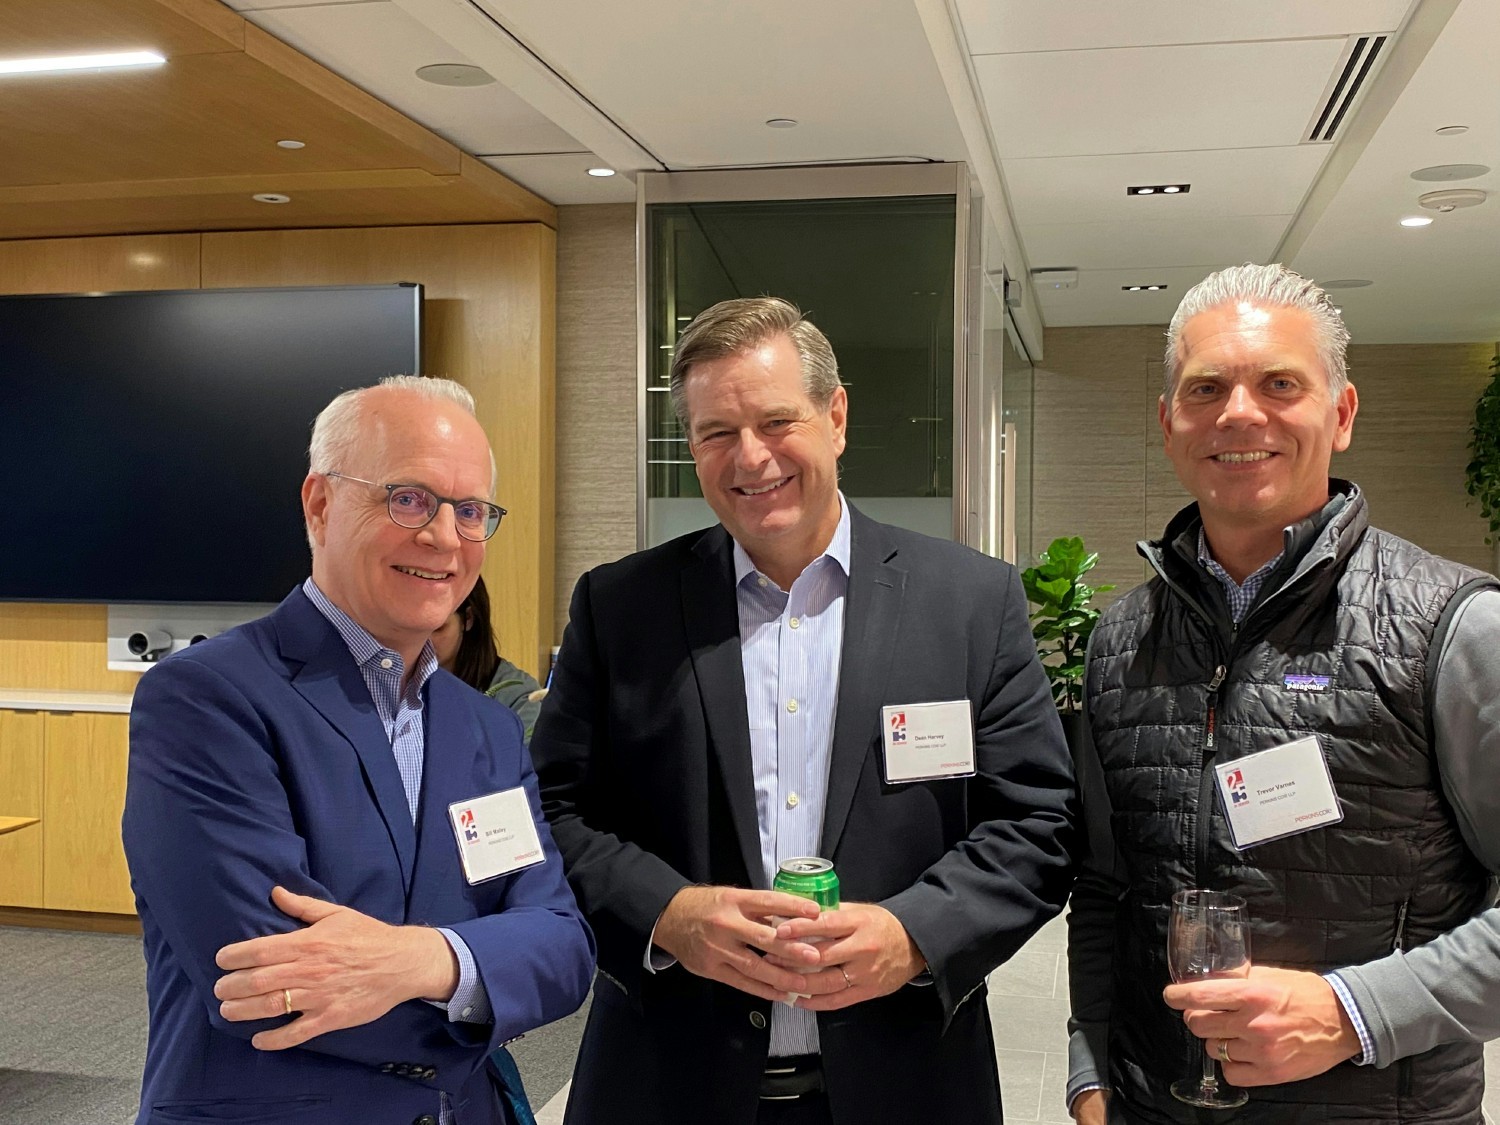 This is Bill Maley (CEO of Perkins Coie), Dean Harvey (Partner) and Trevor Varnes (CFO) at Denver Open House, March 2023